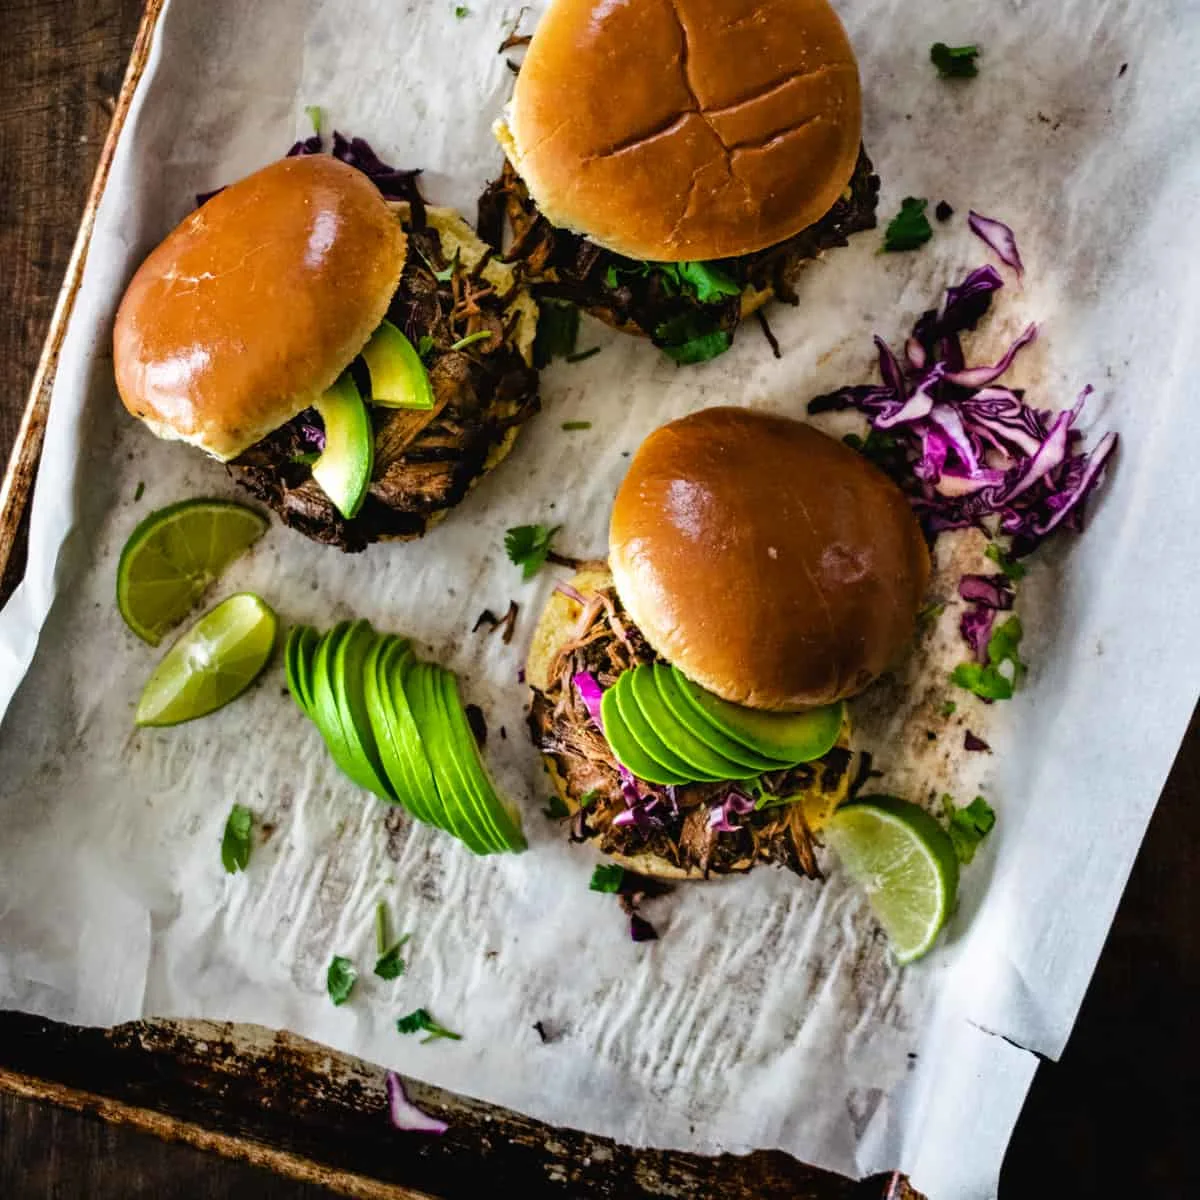 Three shredded beef sandwiches topped with avocado and lime.